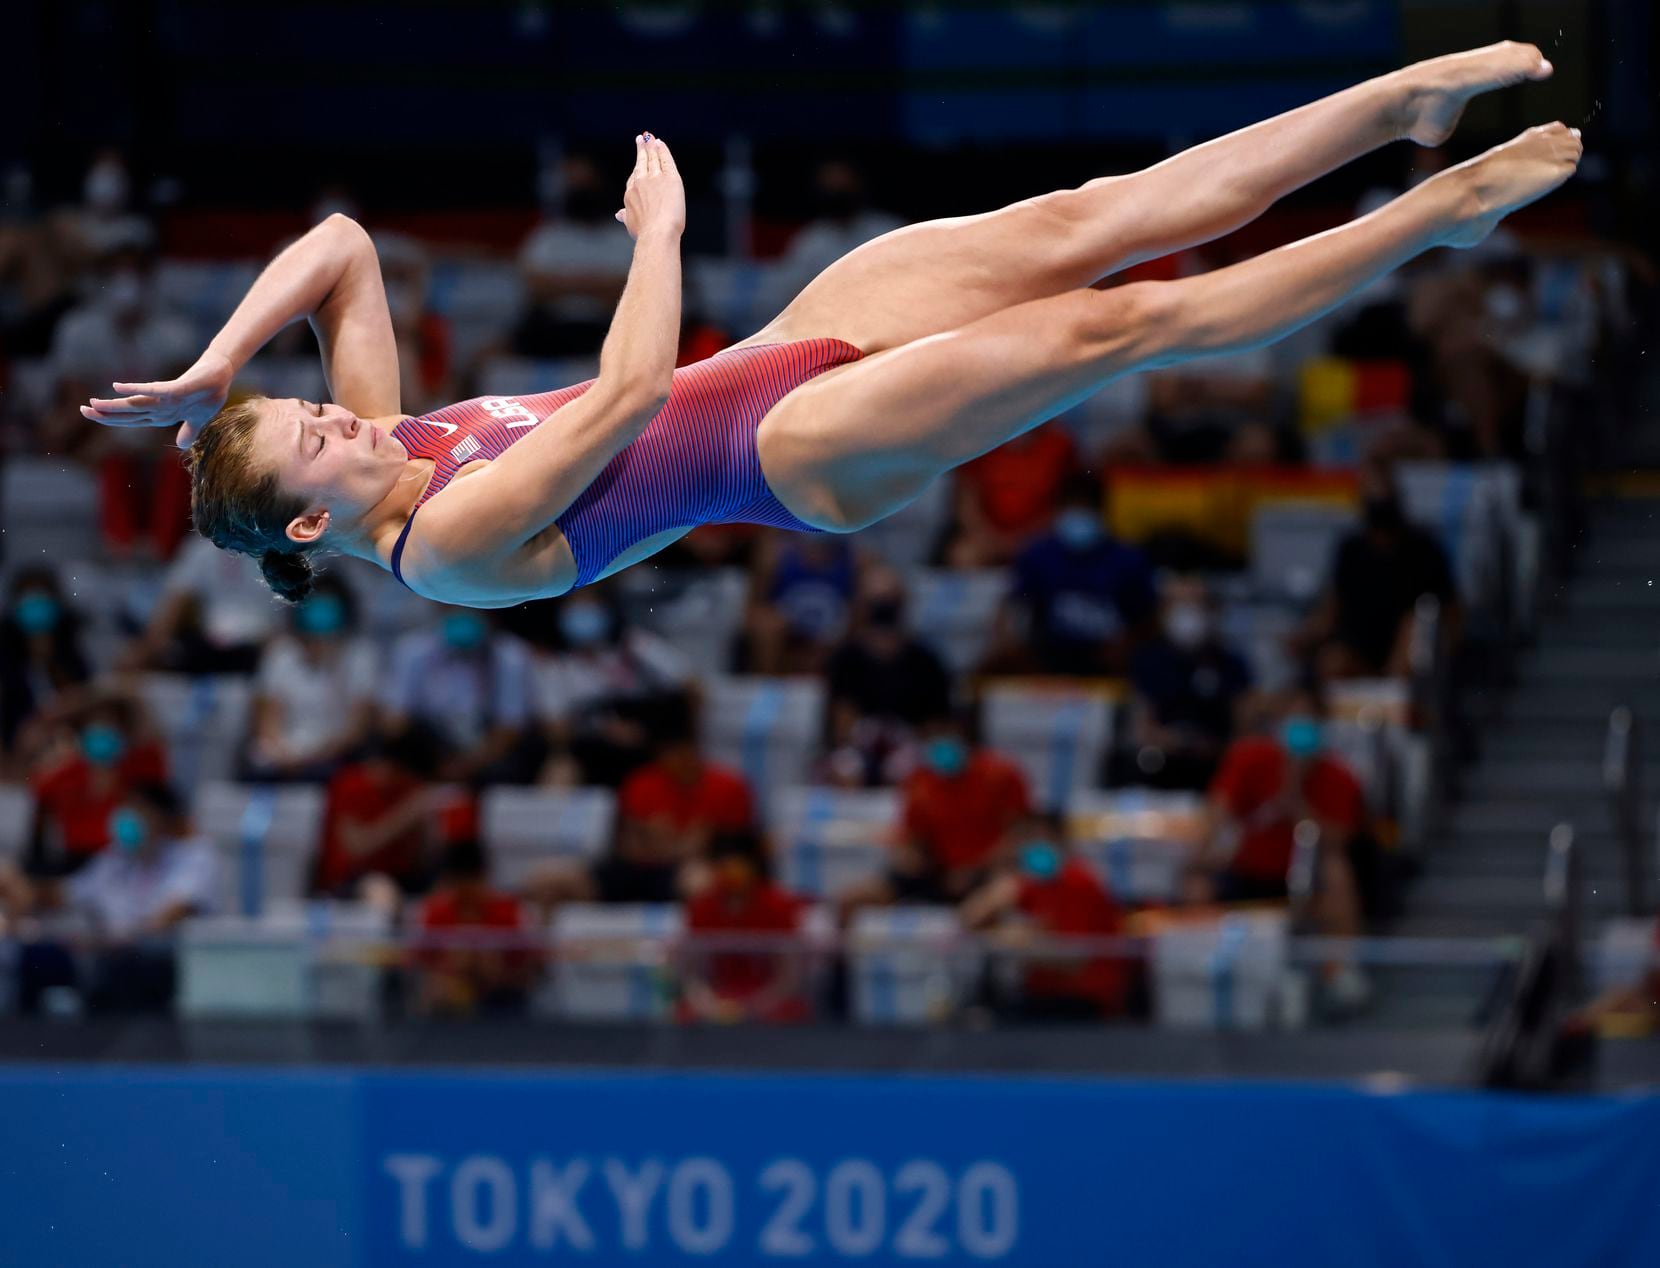 USA’s Hailey Hernandez dives in the women’s 3 meter springboard final during the postponed 2020 Tokyo Olympics at Tokyo Aquatics Centre, on Sunday, August 1, 2021, in Tokyo, Japan. Hernandez finished 9th with a total score of 288.45. (Vernon Bryant/The Dallas Morning News)